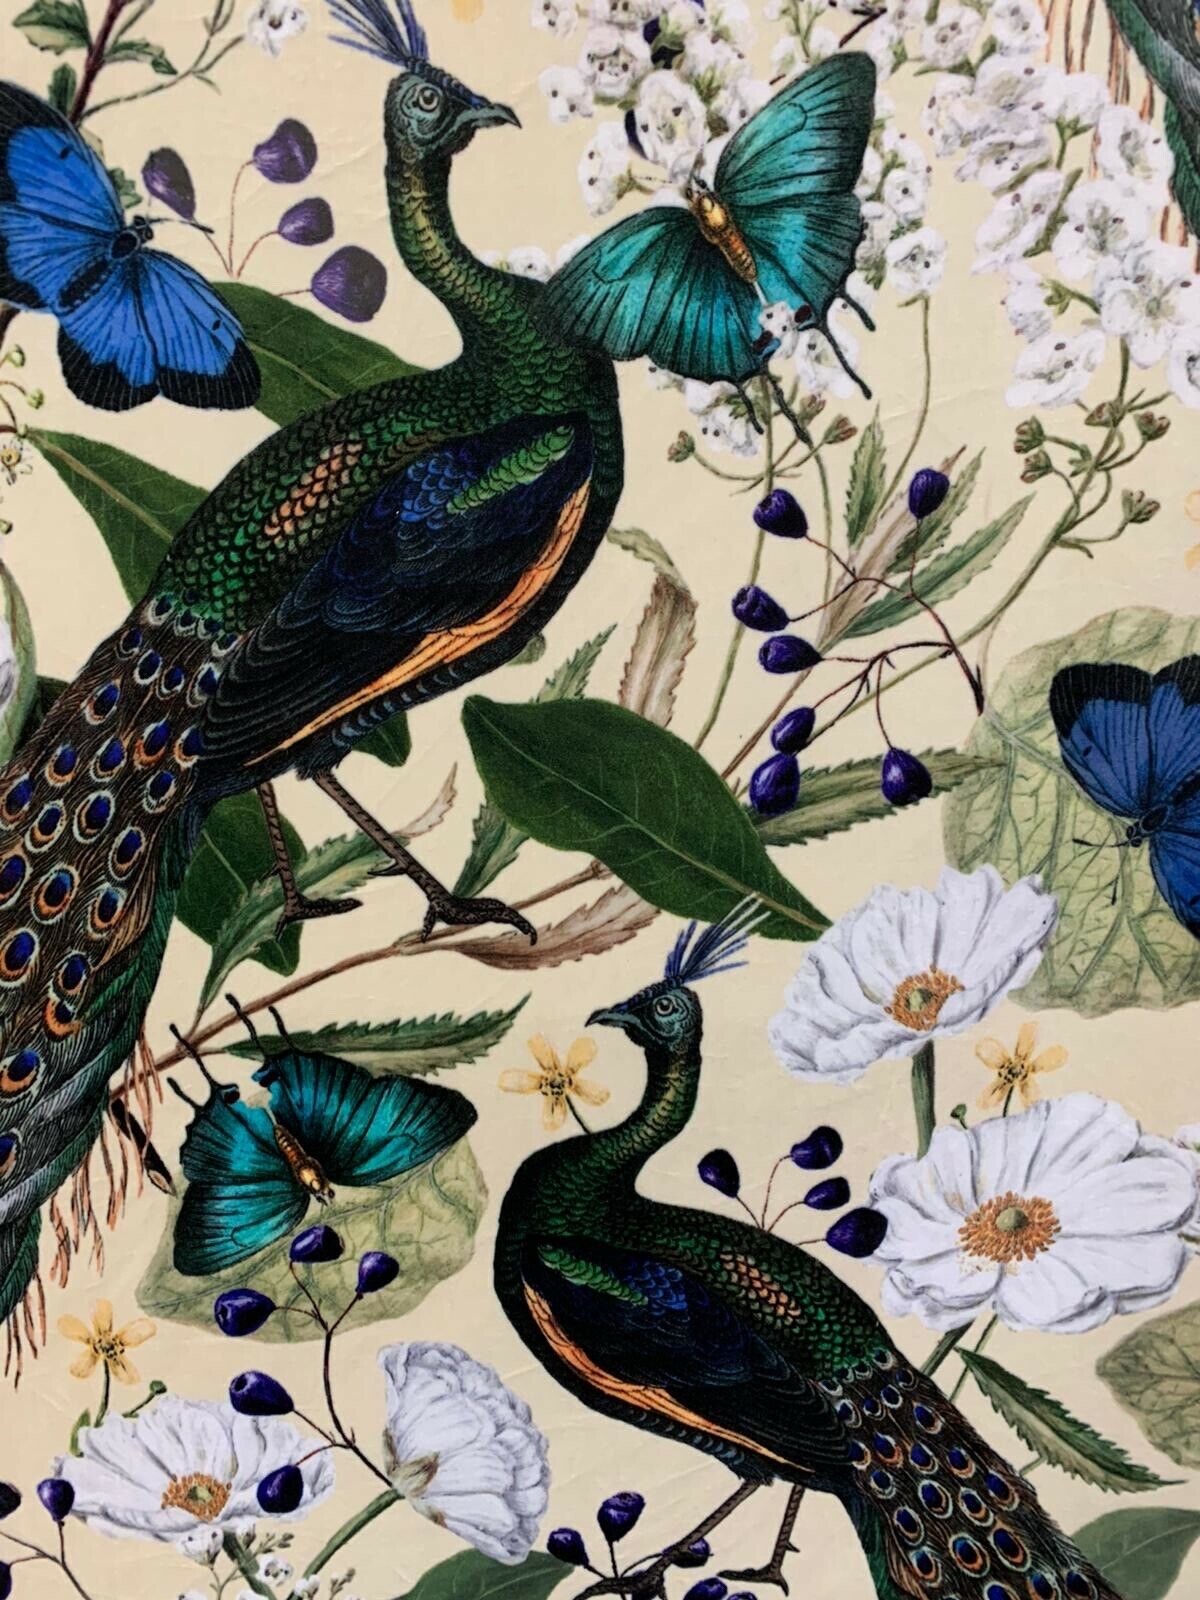 Peacock fabric By the Mater Light Yellow Velvet Butterflies Birds Pattern Sewing Material Botanical Textile Floral Italian Velvet for upholstery pillows cushions arts crafts